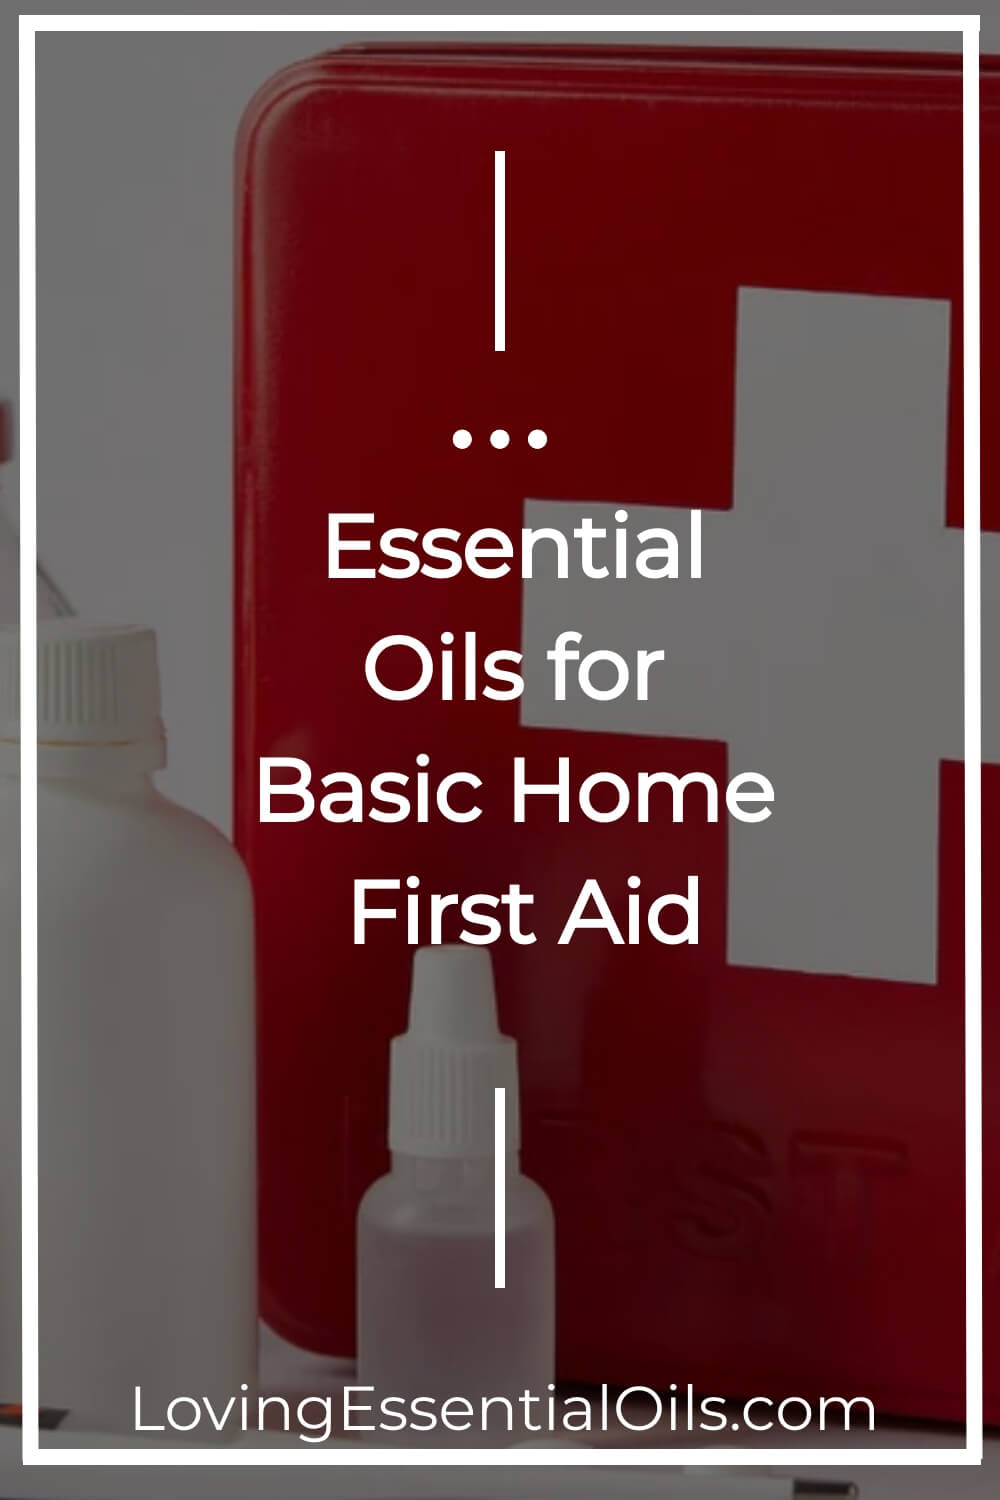 Essential Oils for Basic Home First Aid by Loving Essential Oils